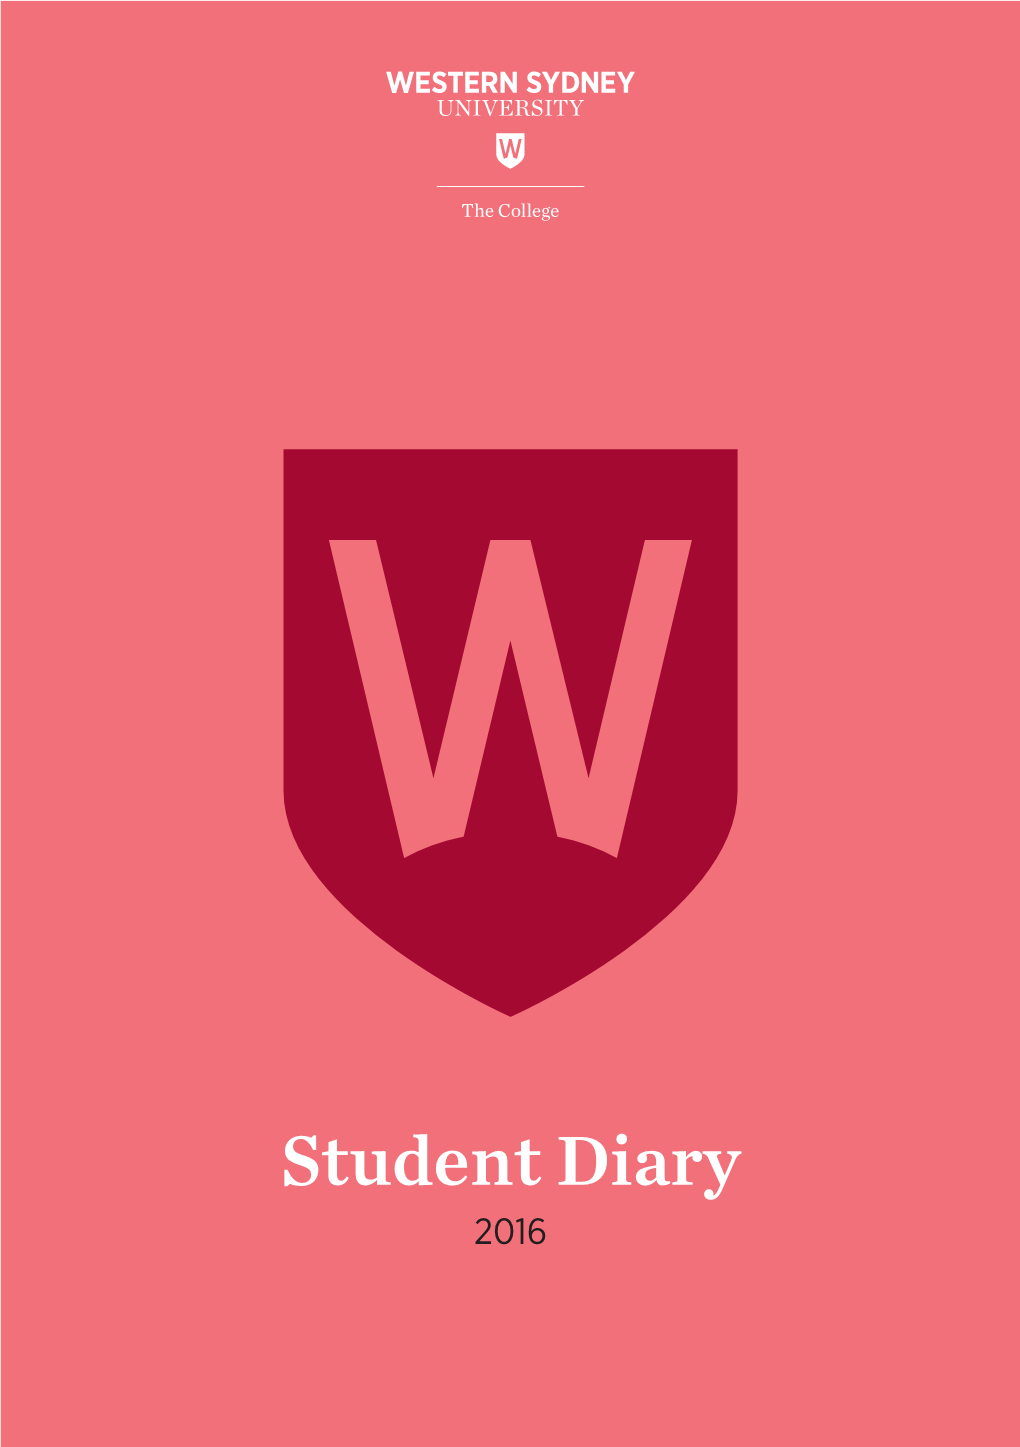 About Your Student Diary